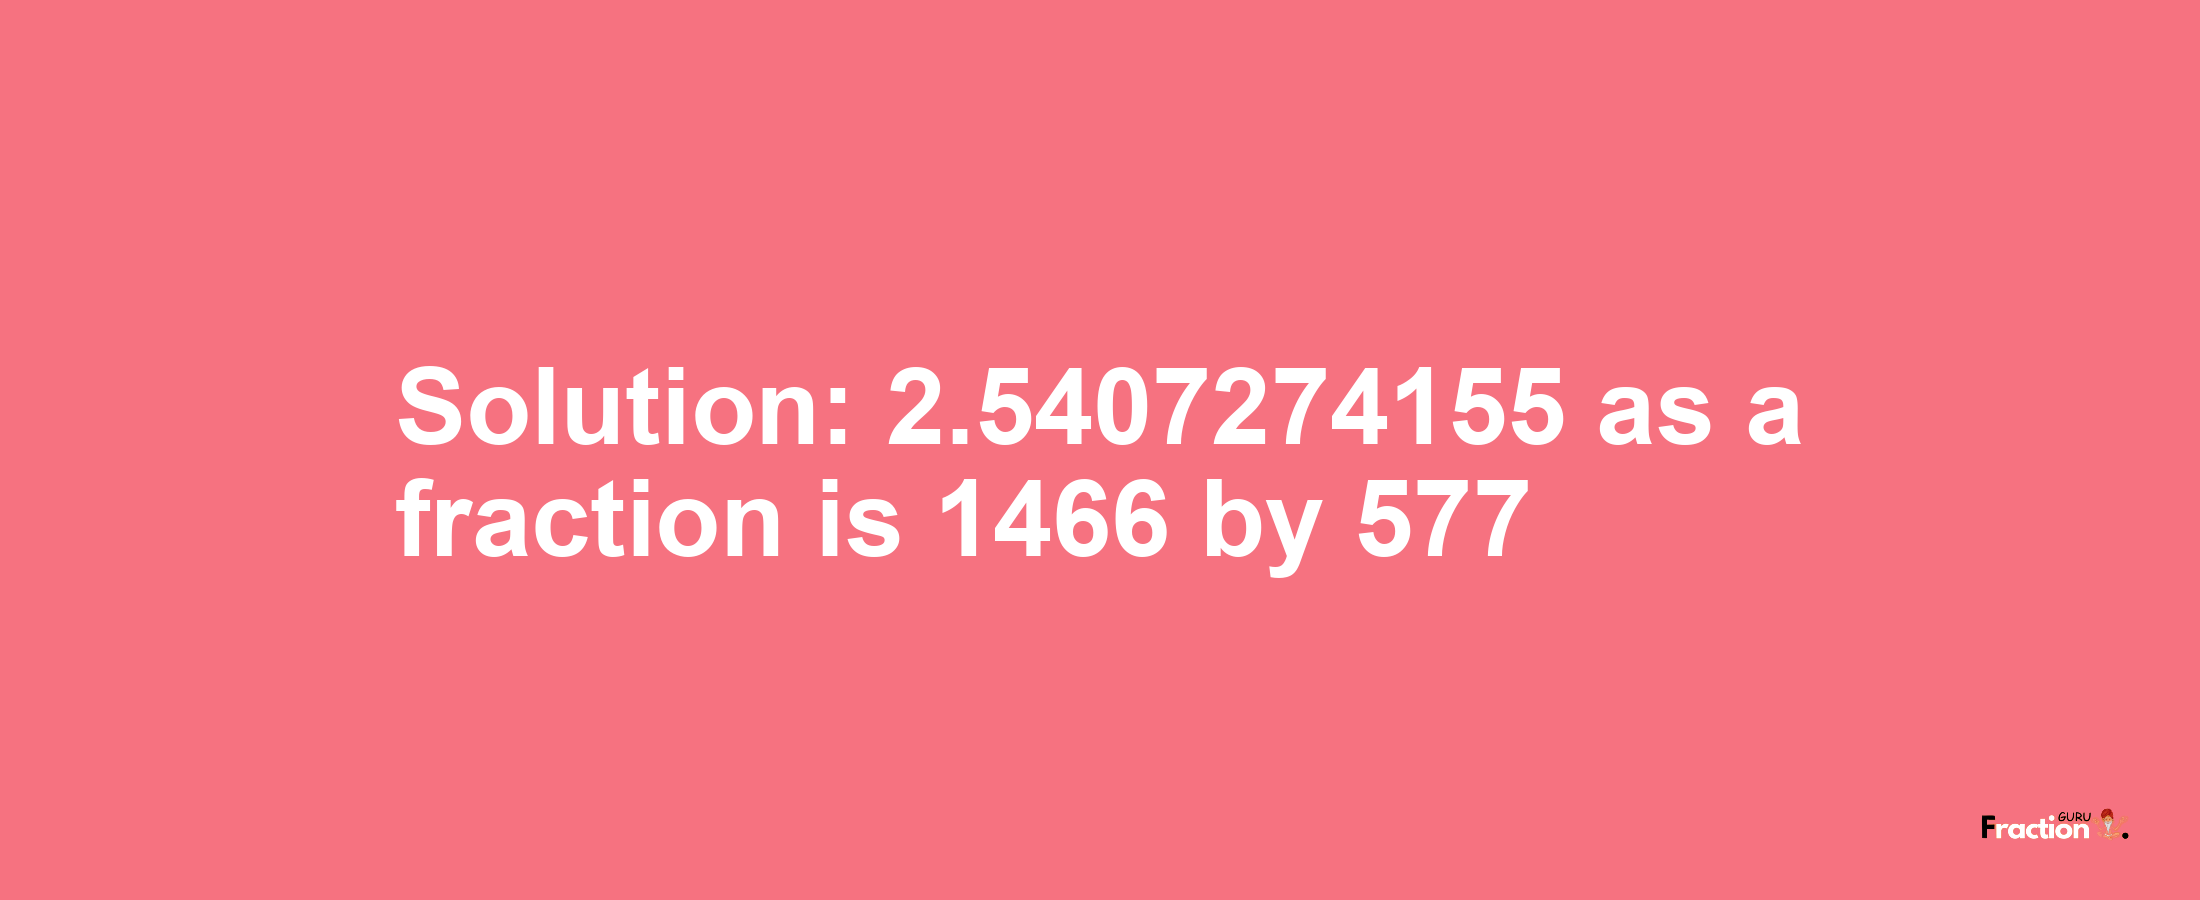 Solution:2.5407274155 as a fraction is 1466/577